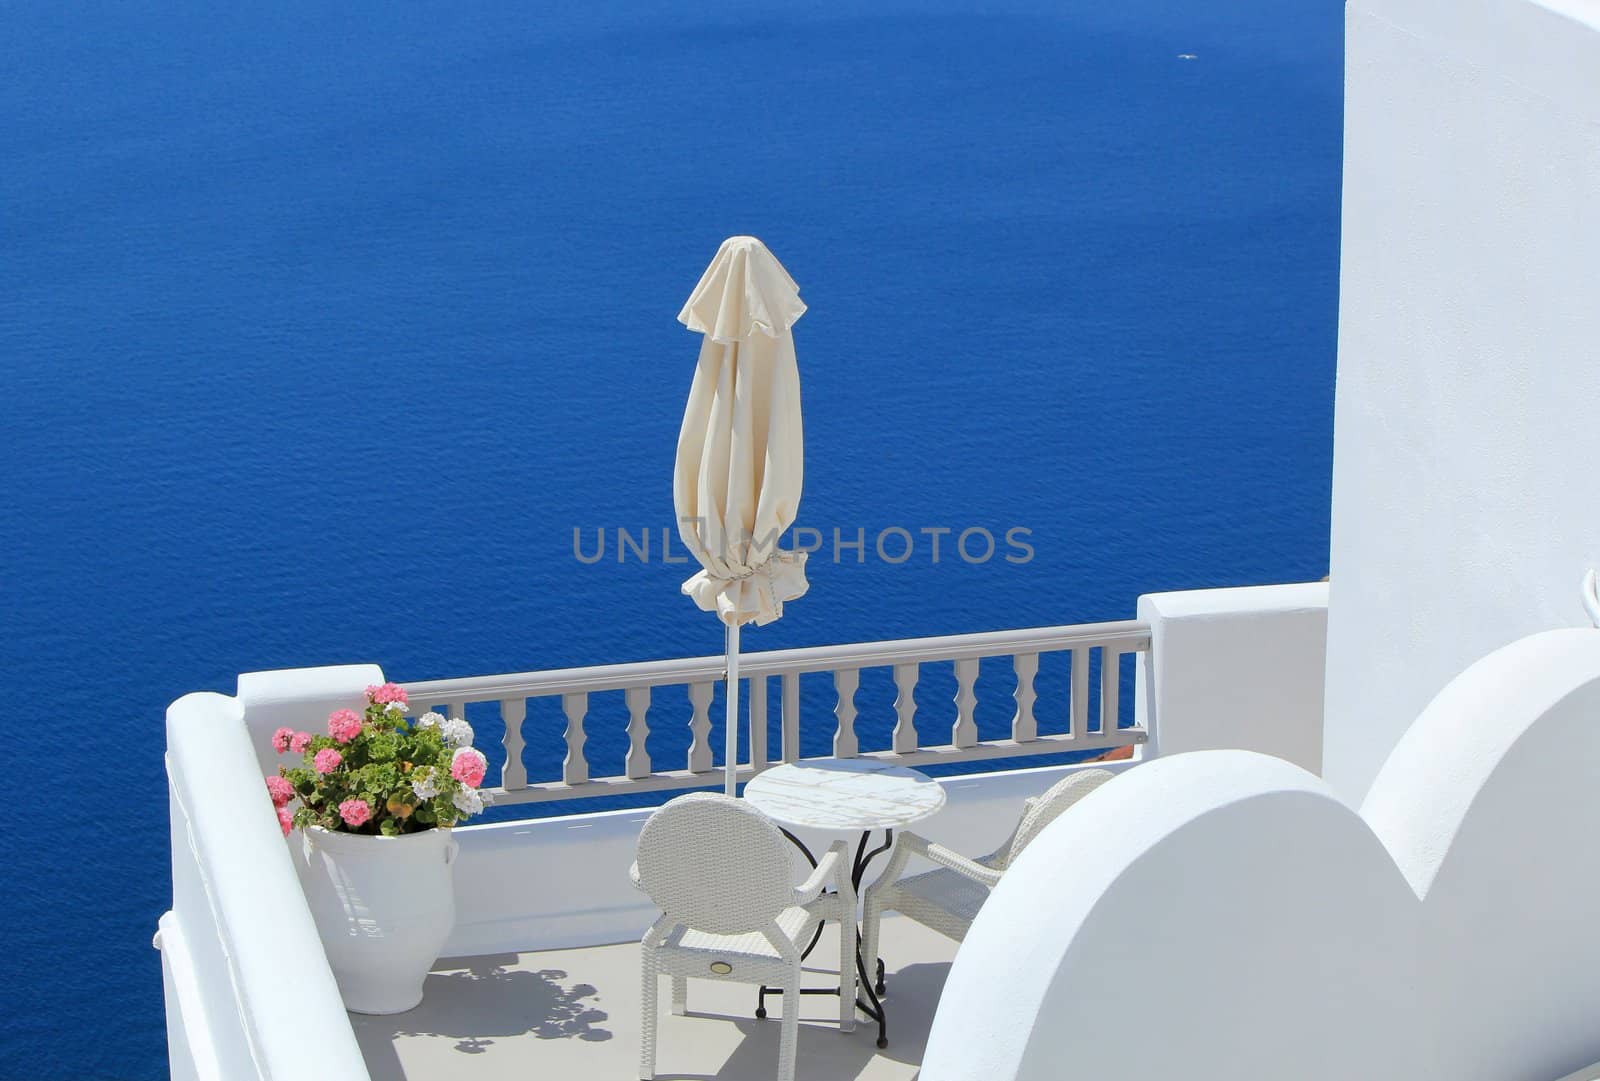 Umbrella, flowers, chairs and table in a white balcony at the sea, Santorini, Greece